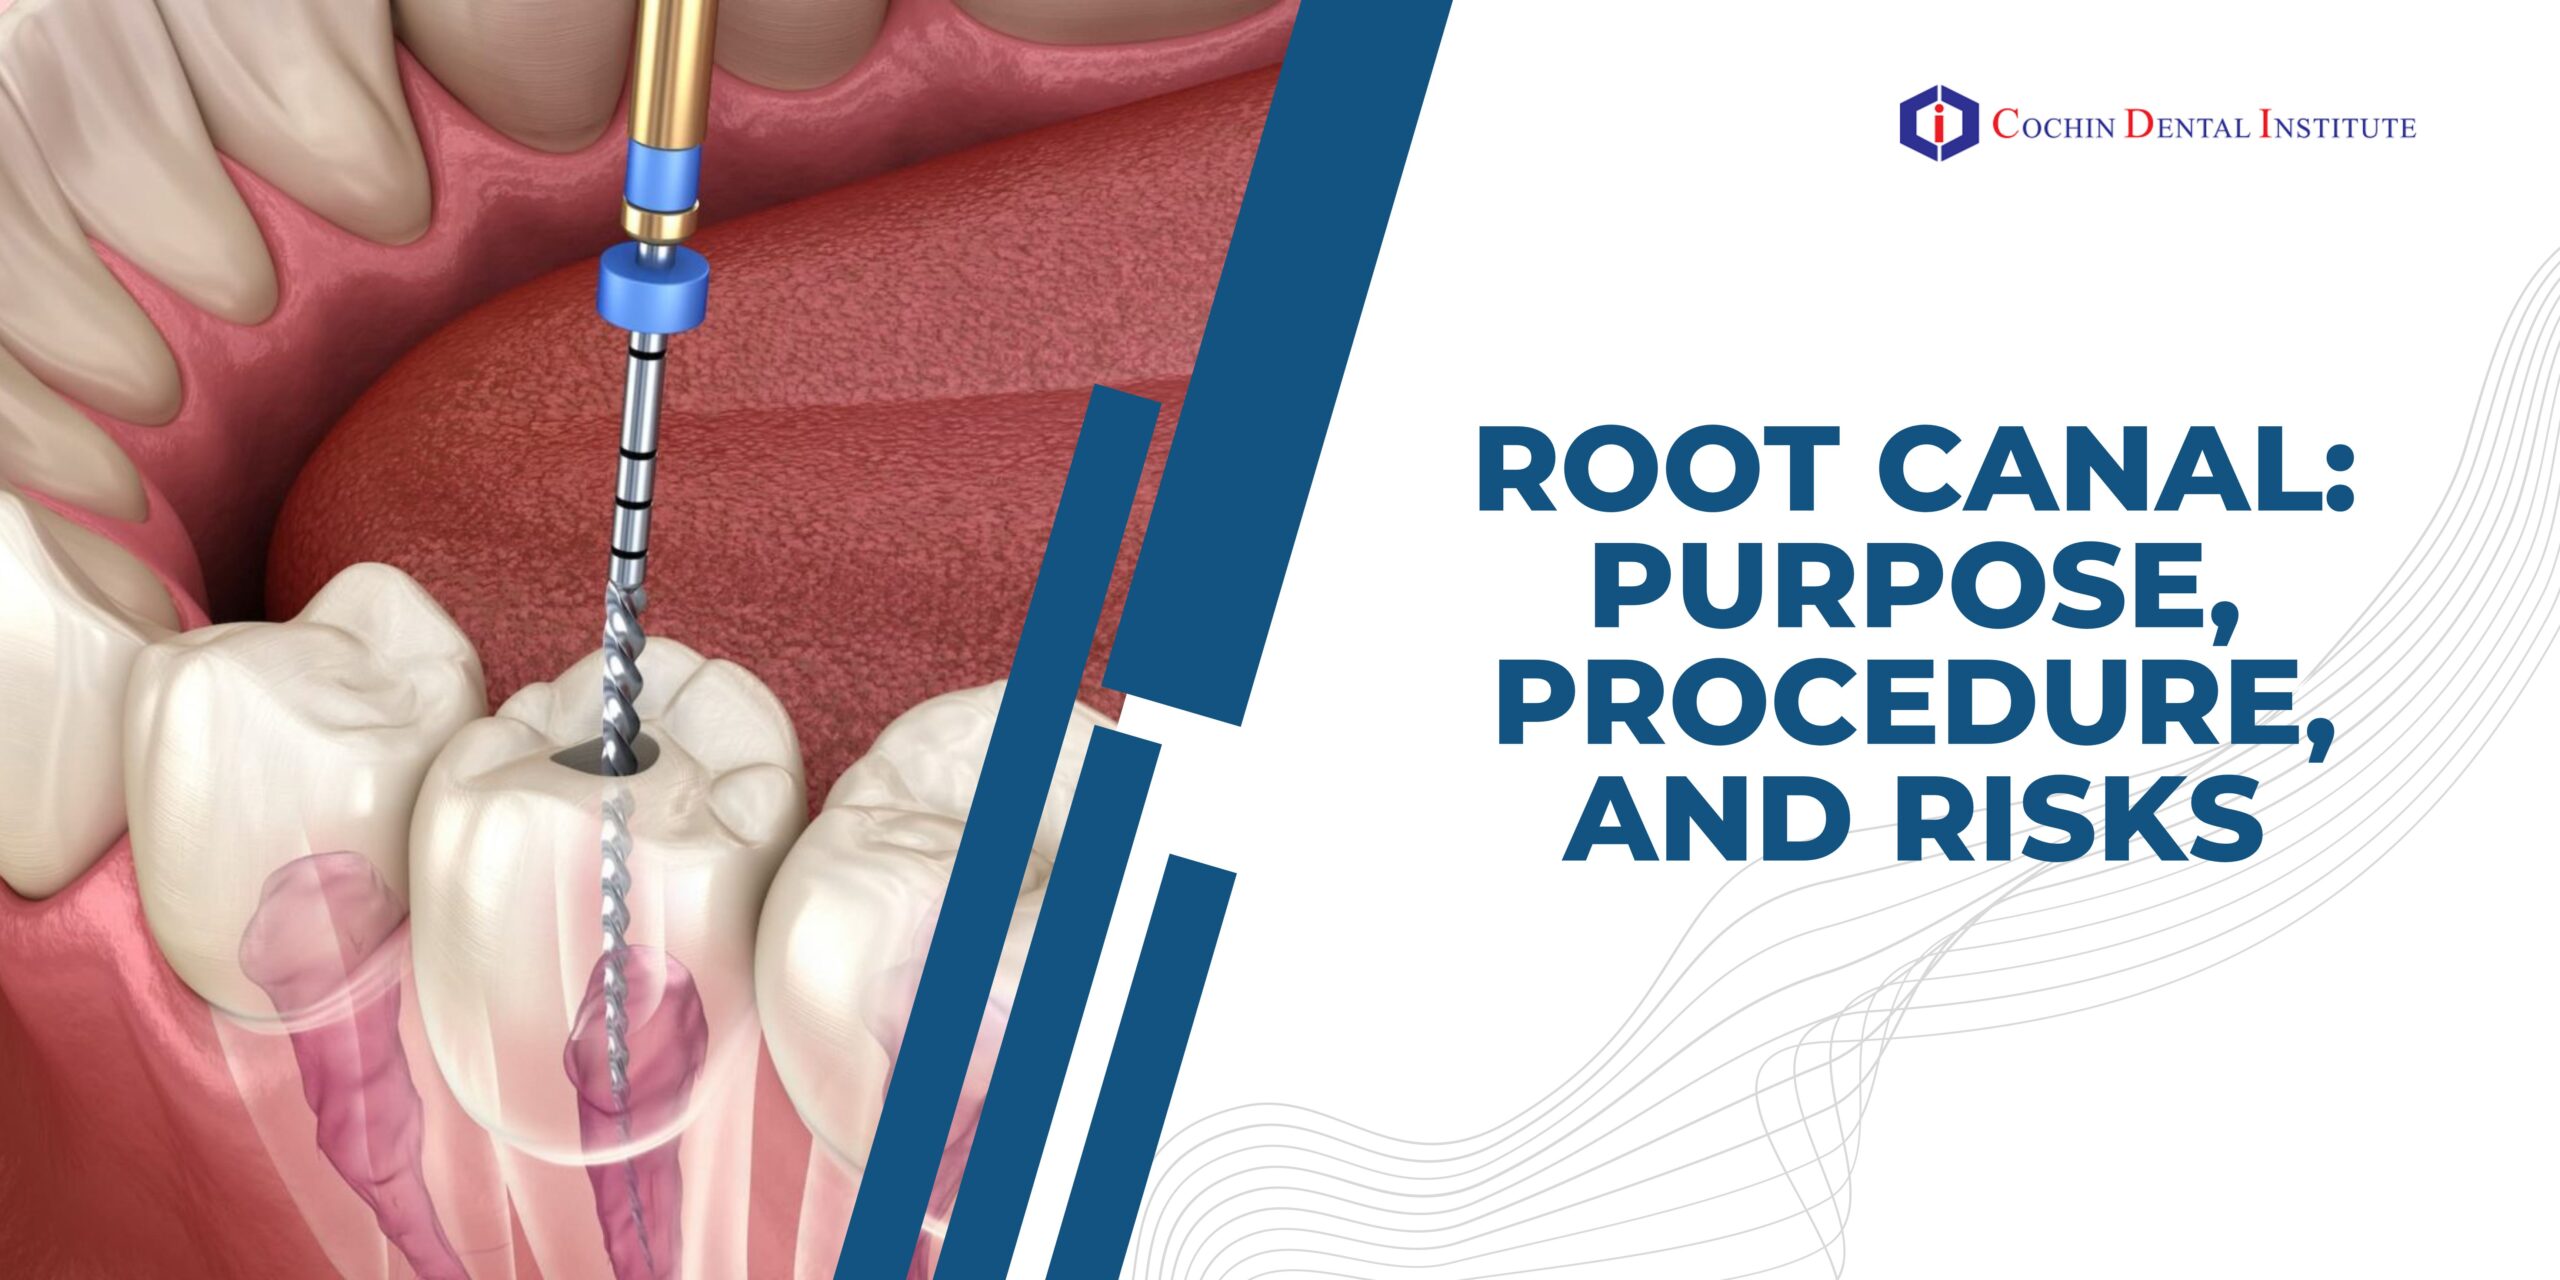 root canal: purpose, procedure and risks